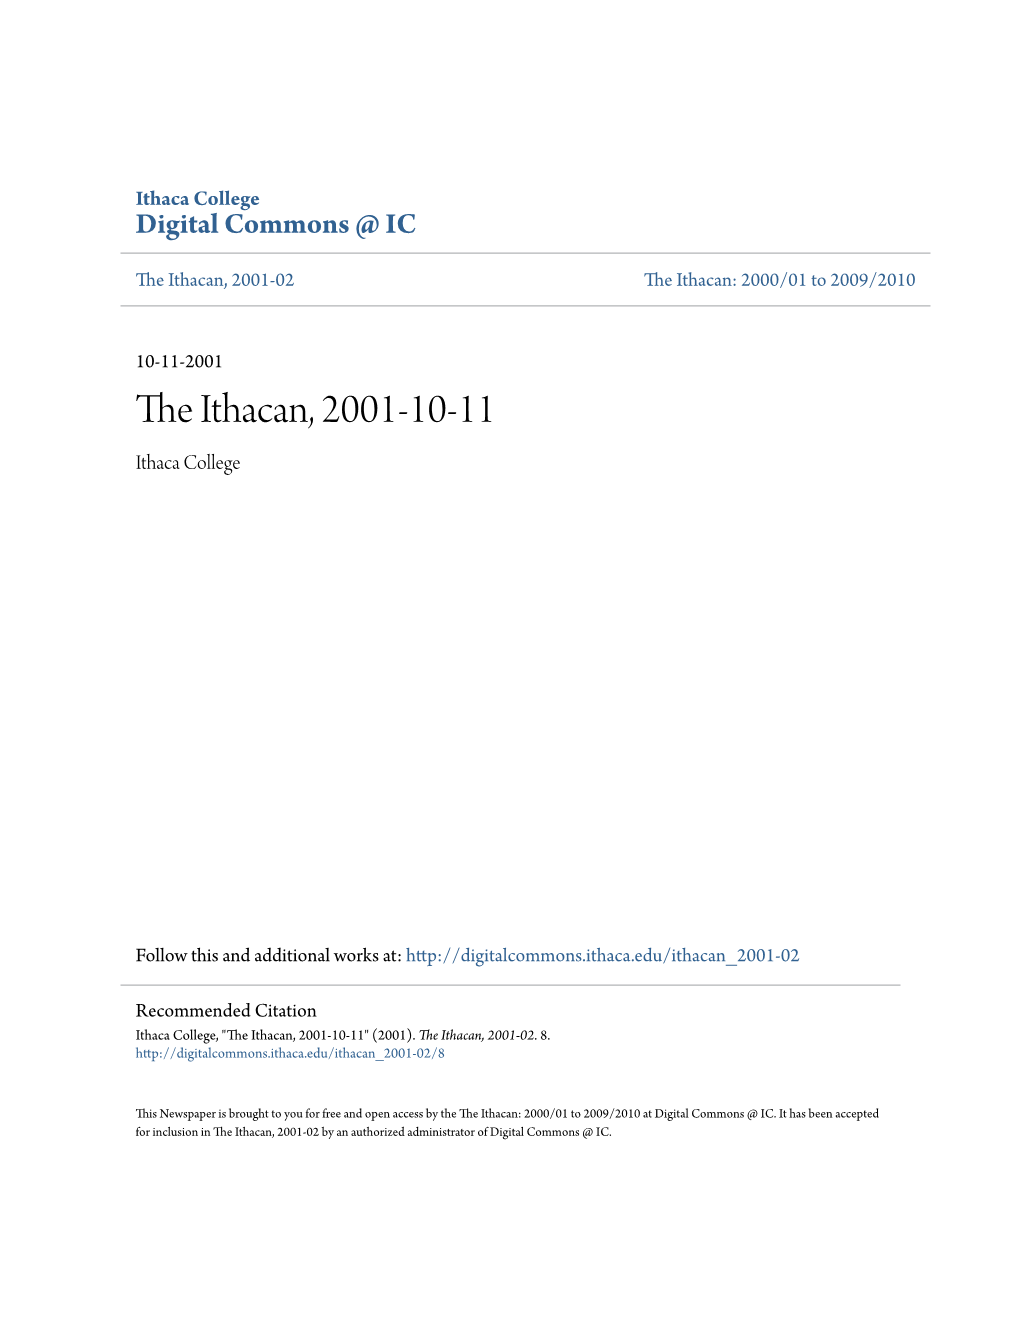 The Ithacan, 2001-10-11